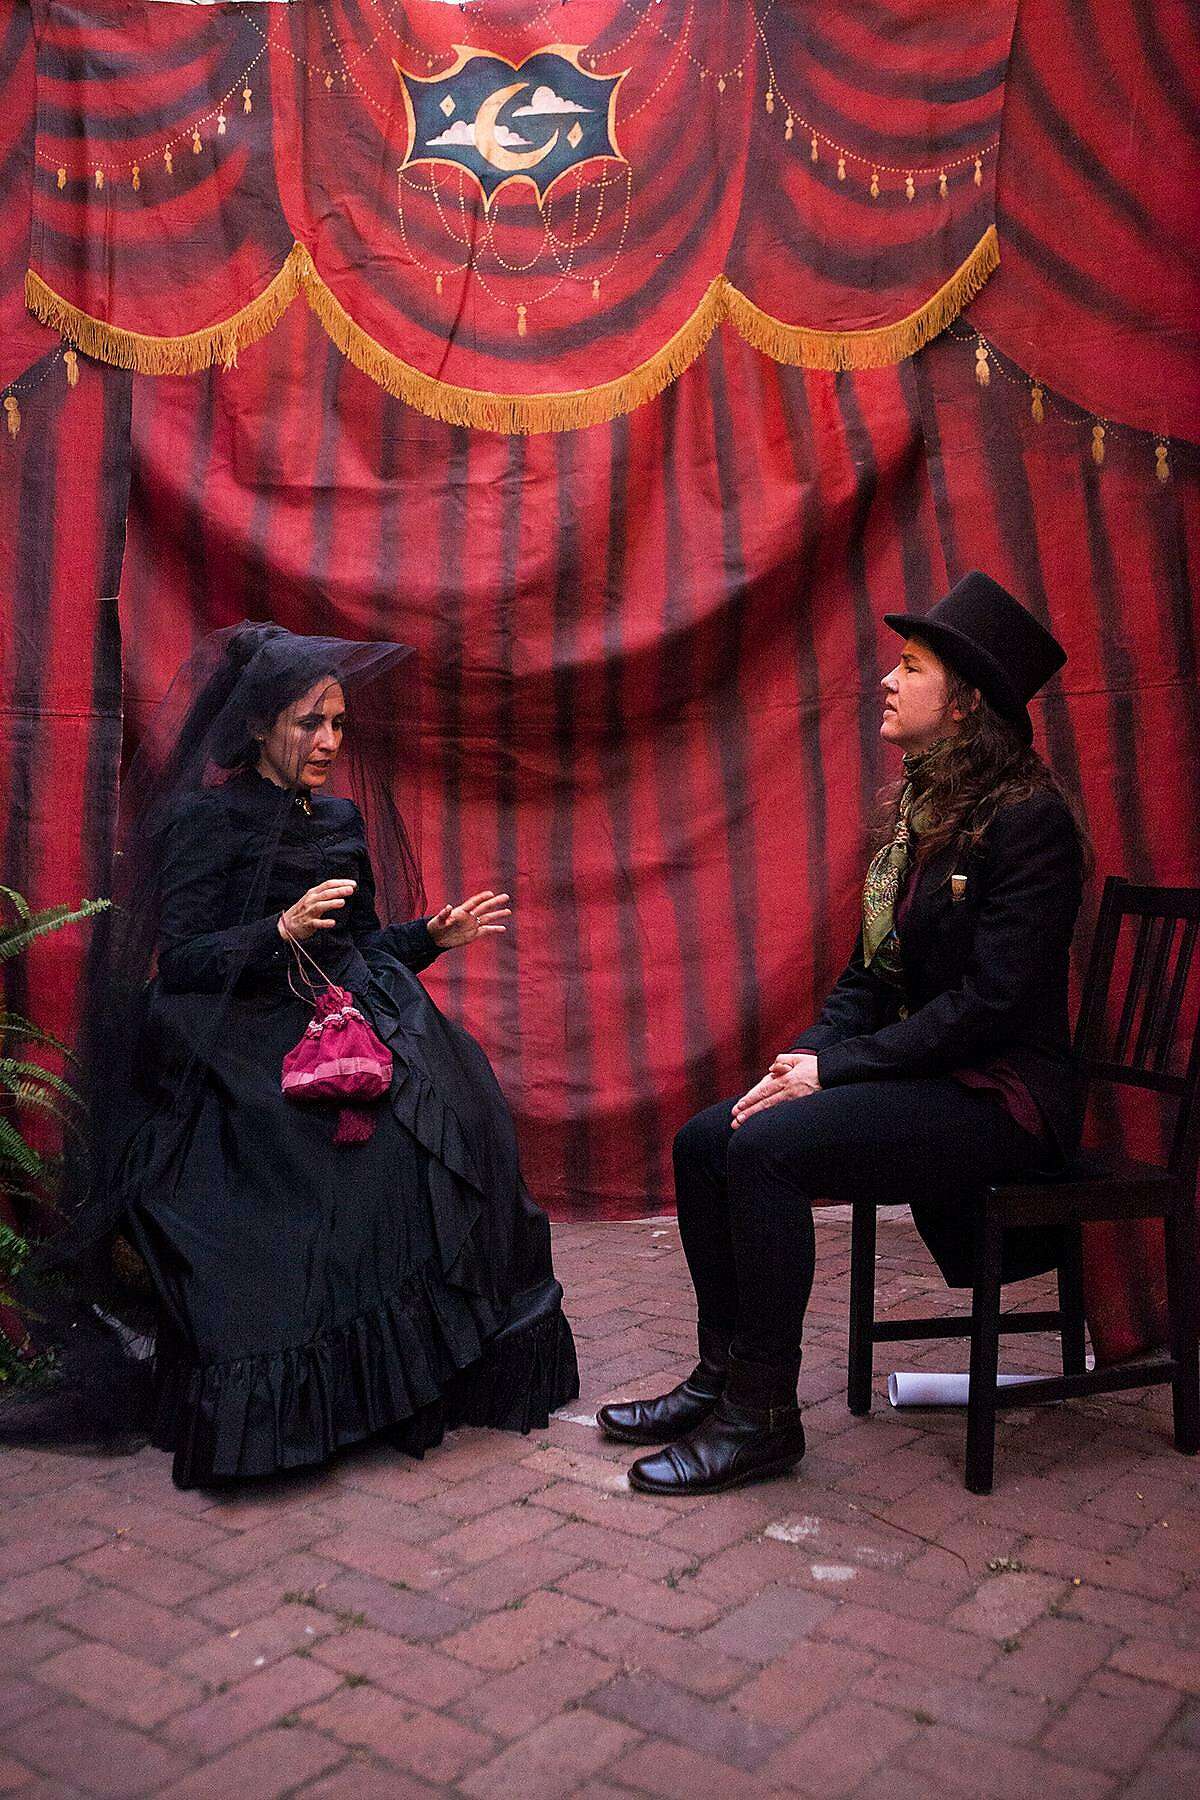 From left: Maria A. Leigh as Josephine and�Julie Douglas as the Seller, Doctor Vitae, in Idiot String's "Elixir of Life."